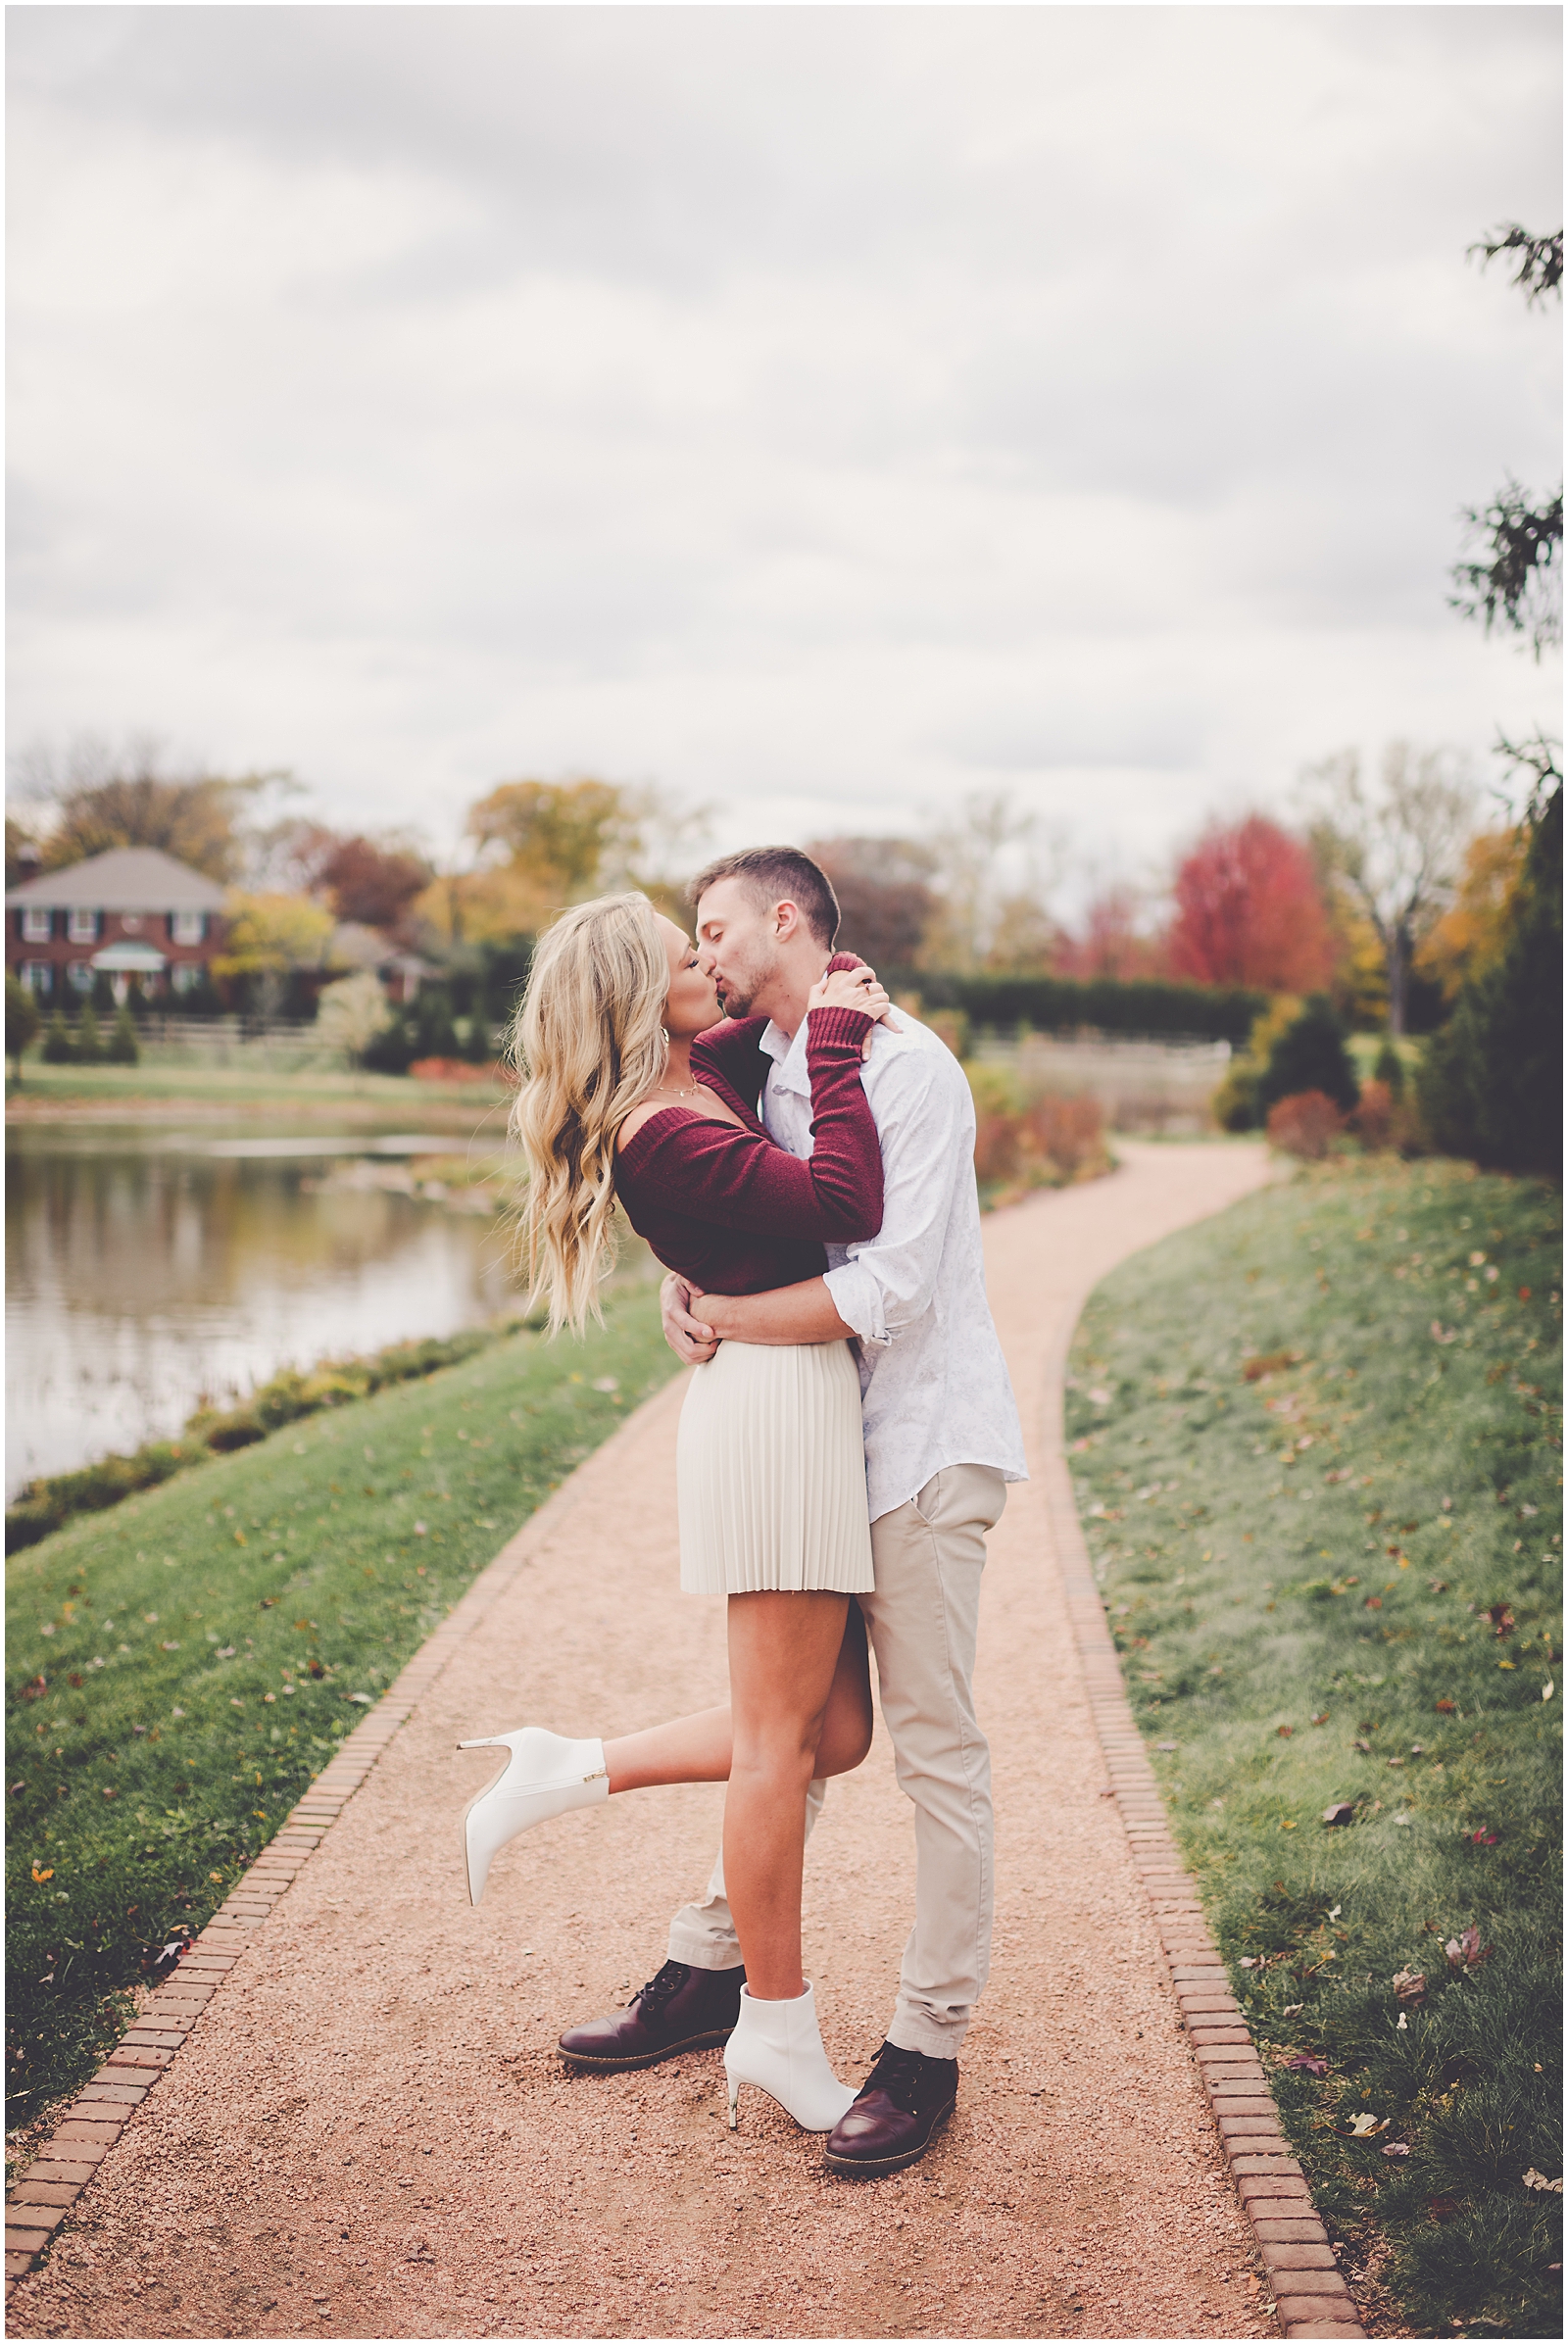 Kali and Trace's fall Cantigny Park engagement photos in Wheaton, IL with Chicagoland wedding photographer Kara Evans Photographer.